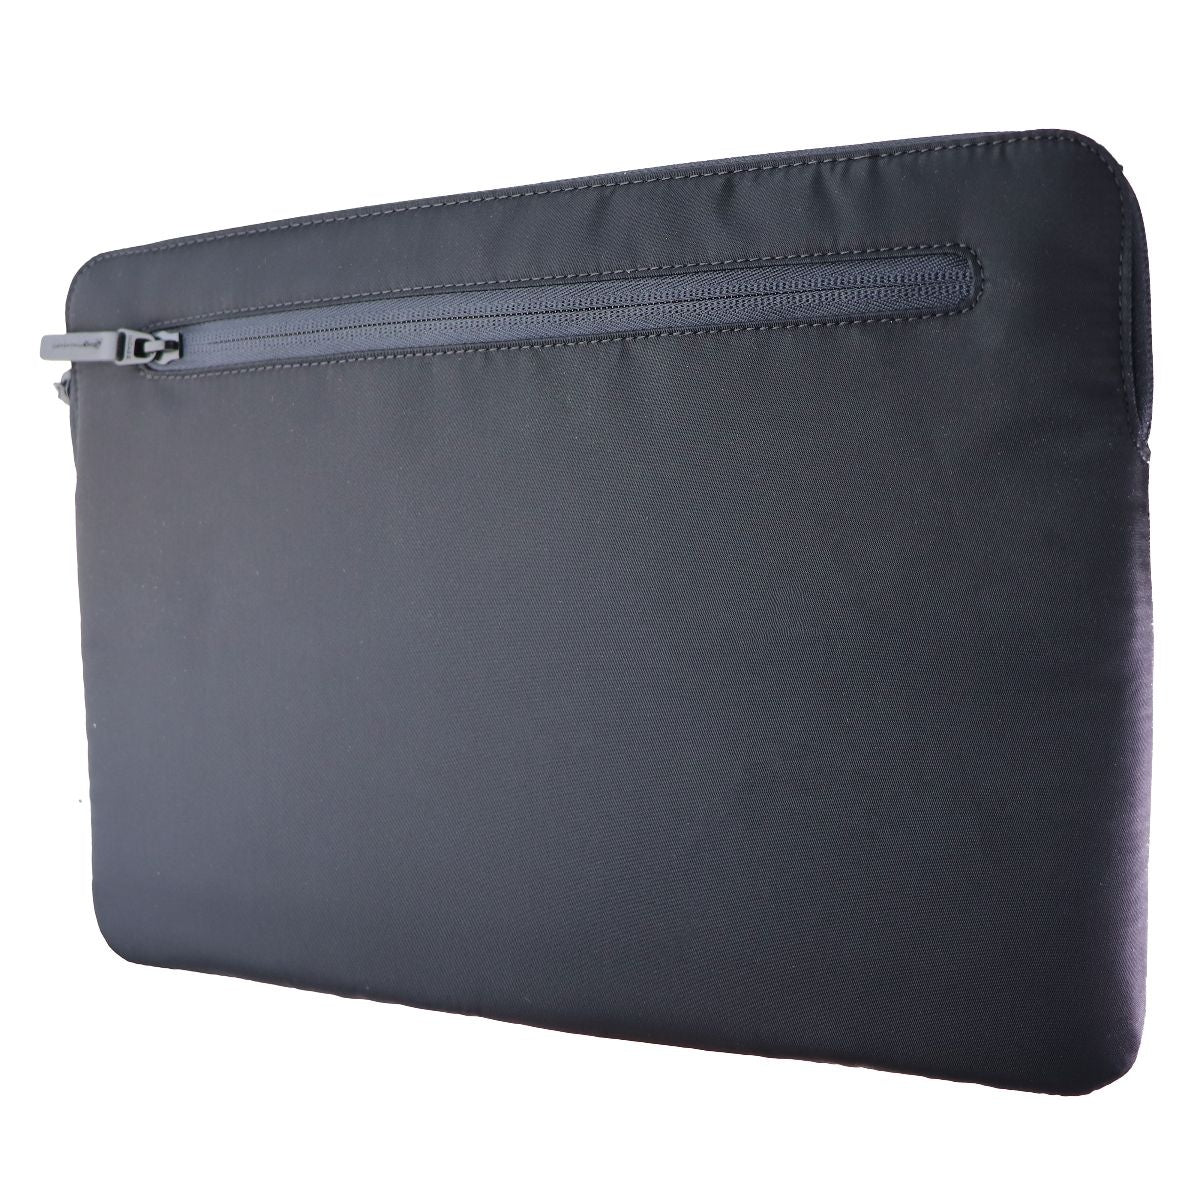 Incase Foam Padded Nylon Sleeve for Tablets + Laptops up to 13 inches - Black Computer Accessories - Laptop Cases & Bags Incase    - Simple Cell Bulk Wholesale Pricing - USA Seller